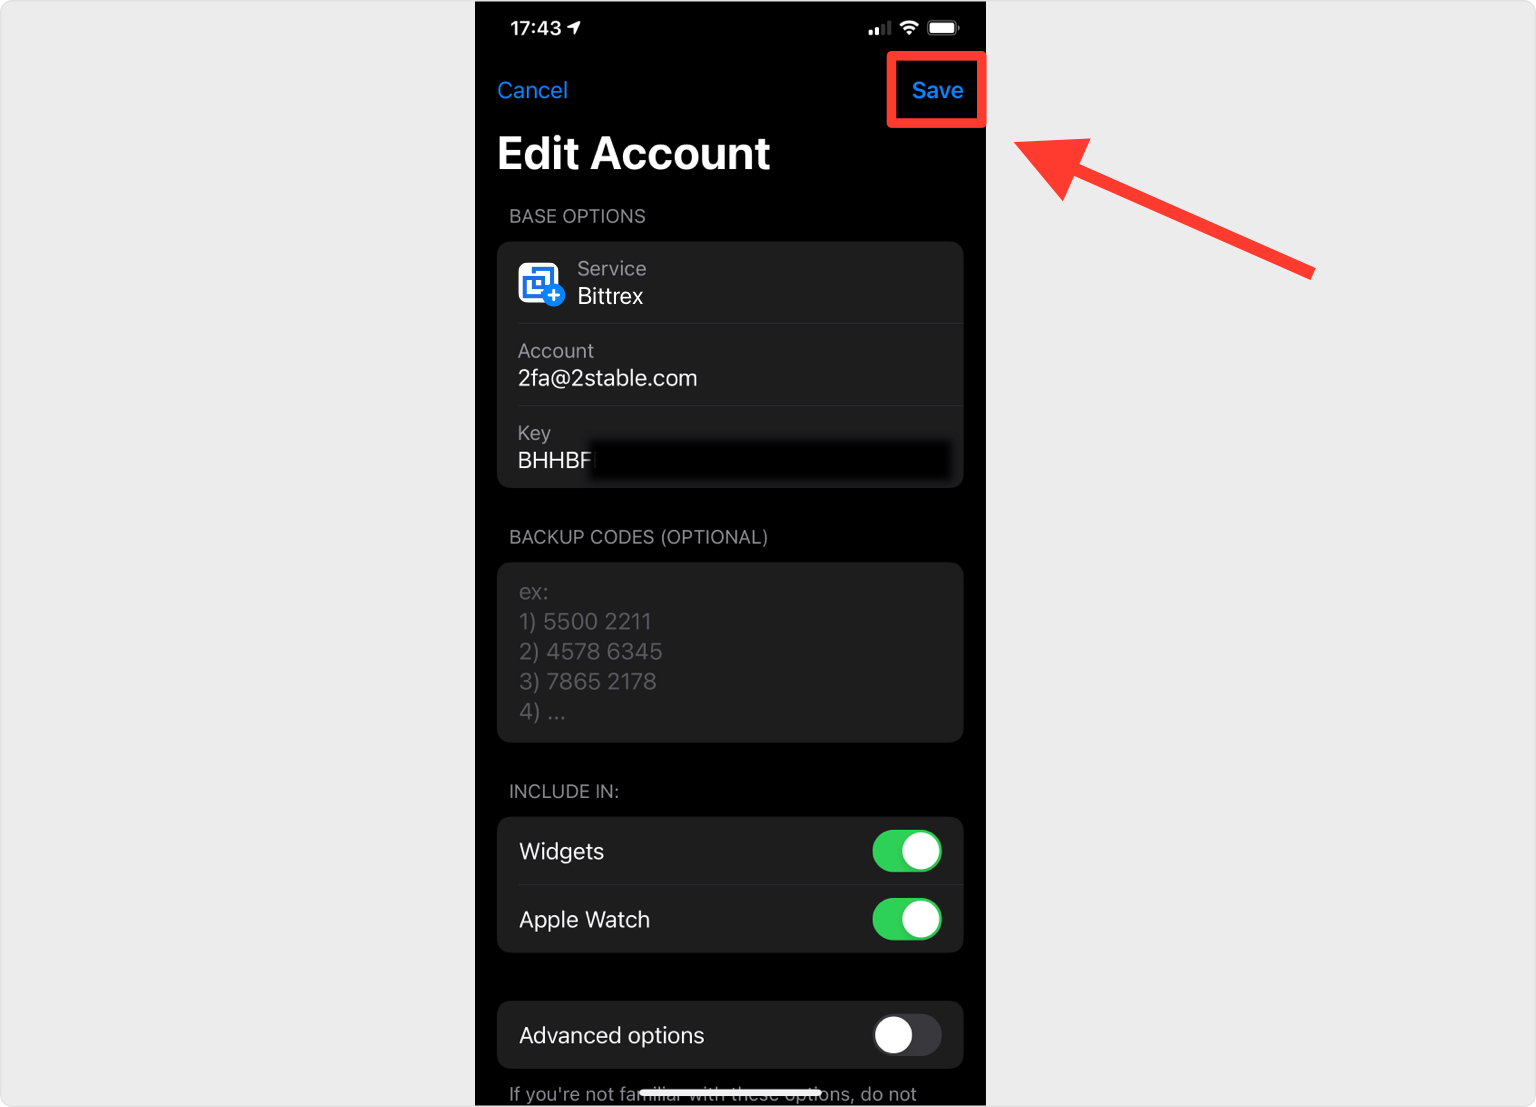 How to set up 2FA (two factor authentication) in Bittrex - SmallCapAsia